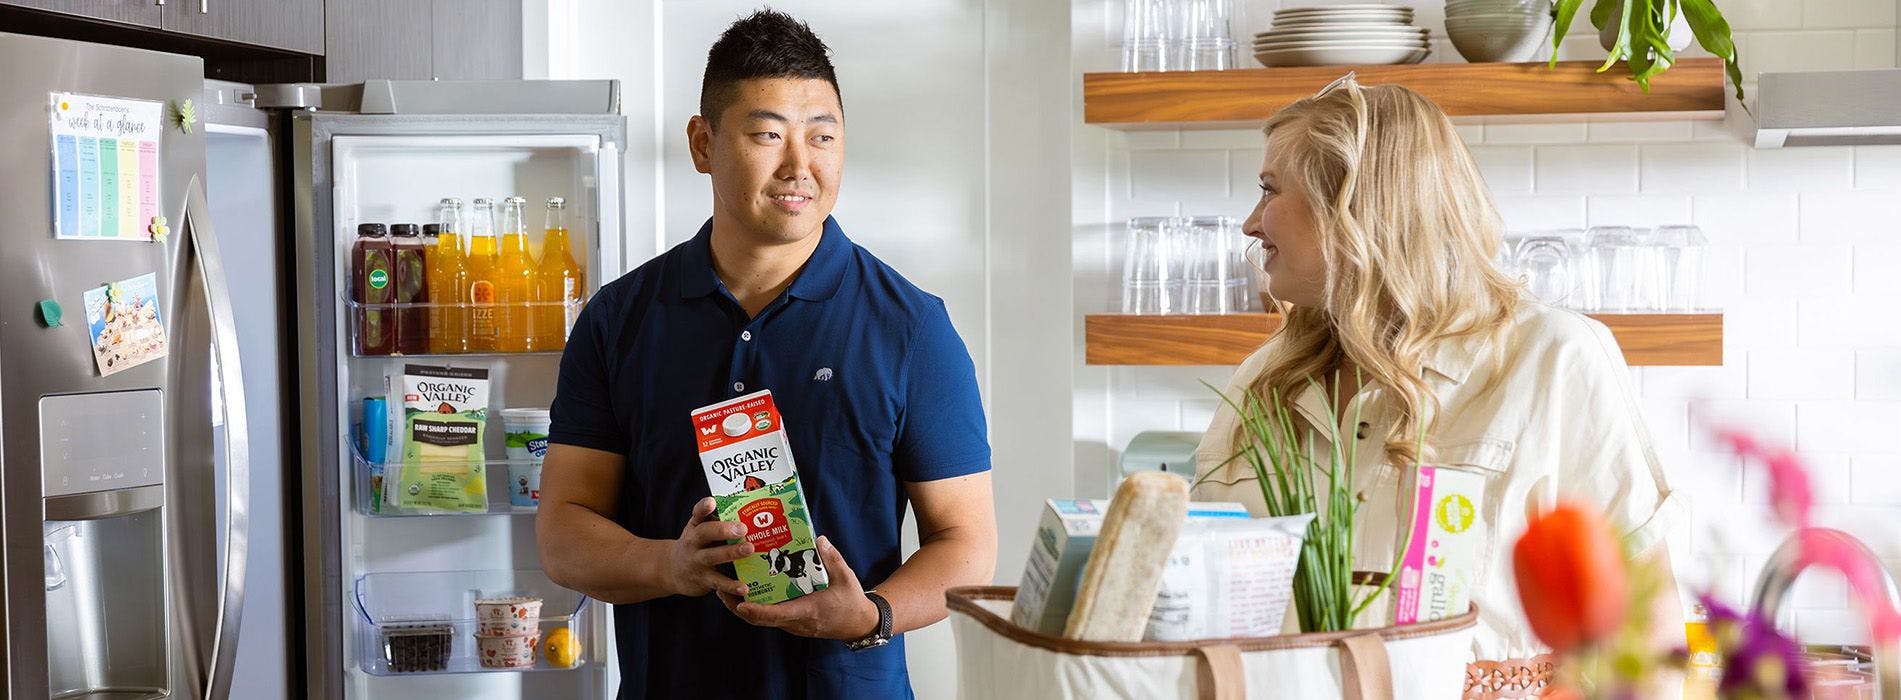 Man and woman holding carton of milk in kitchen with other groceries.